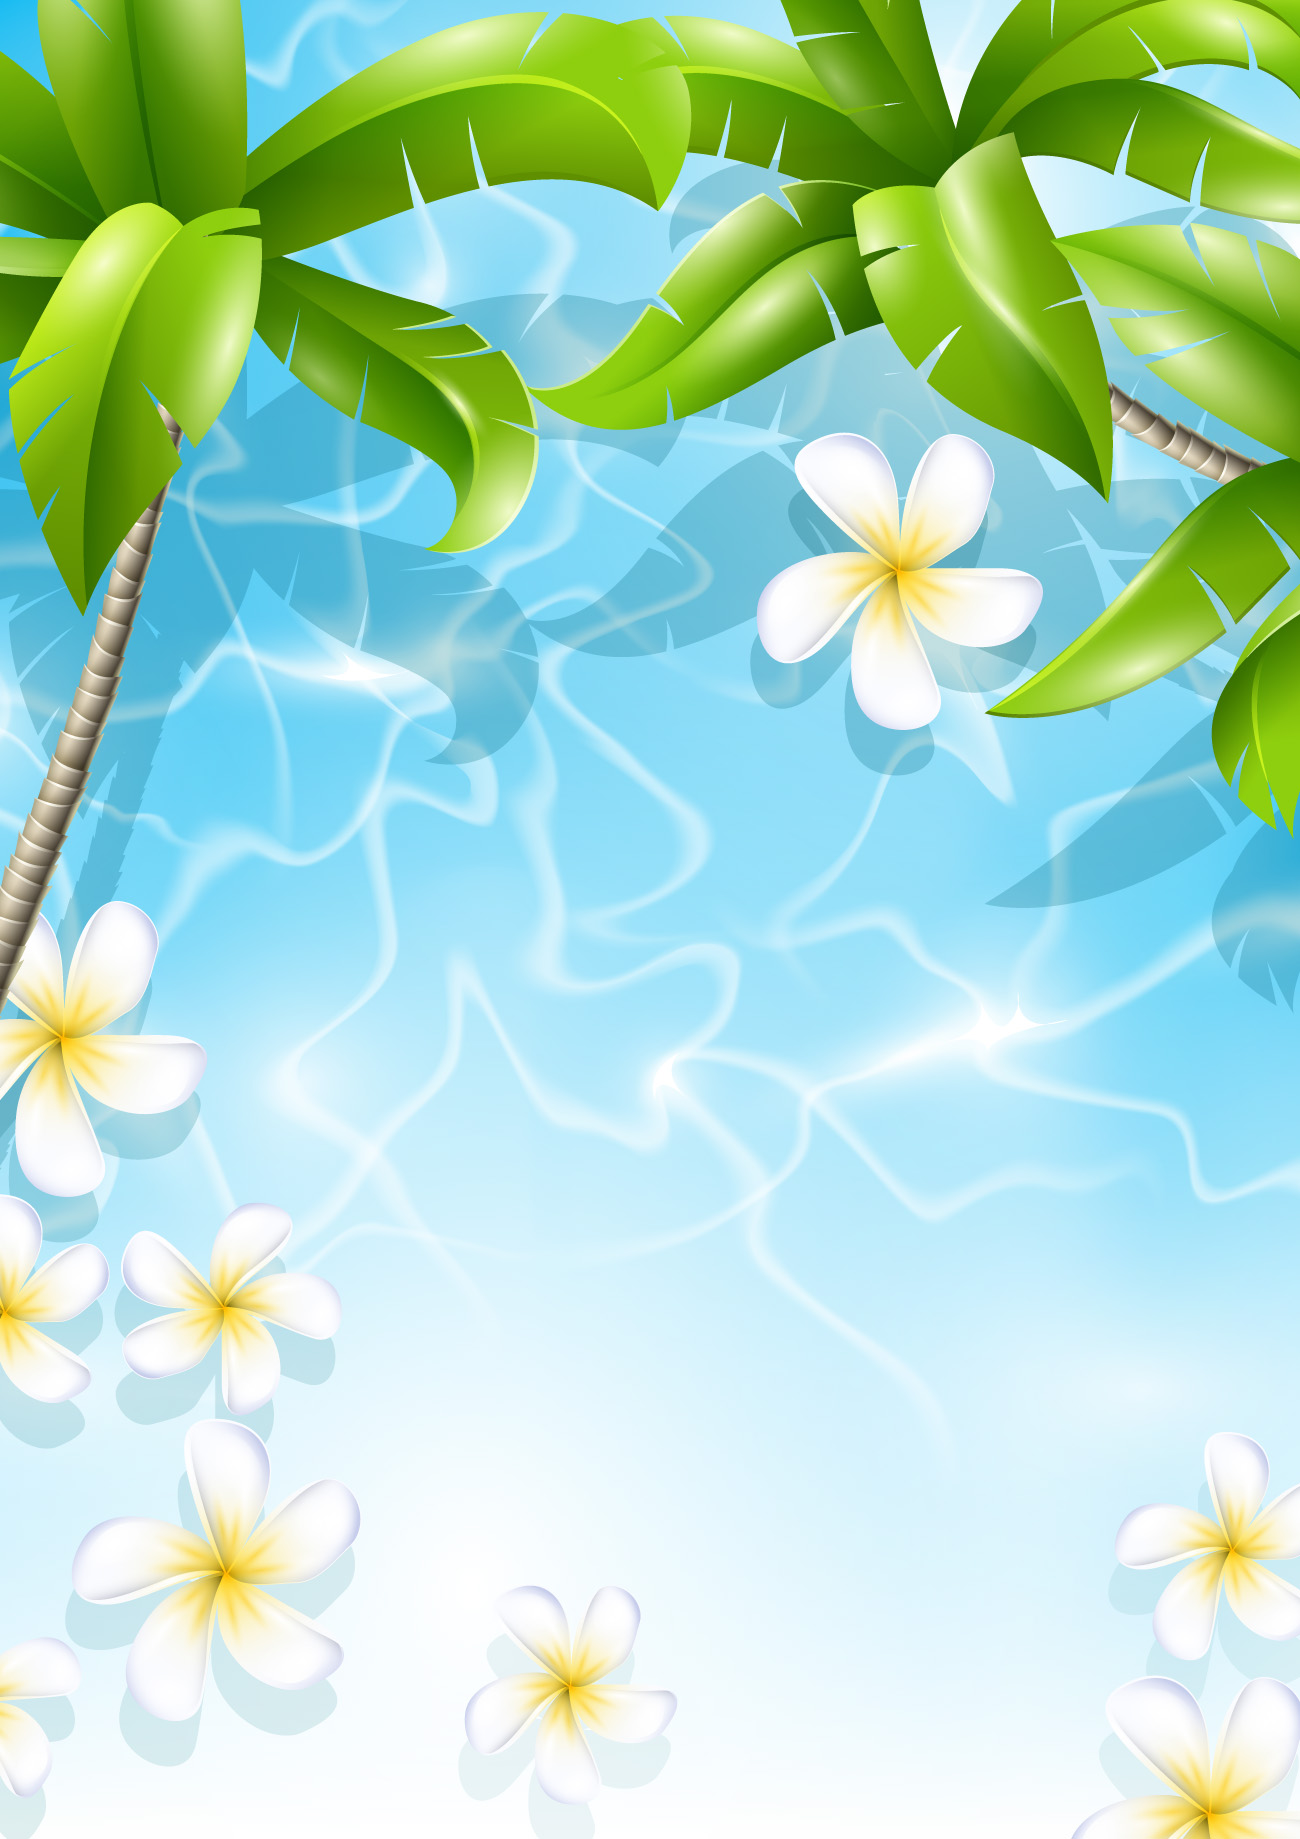 Beautiful Tropical Backgrounds vector 04 tropical beautiful backgrounds background   